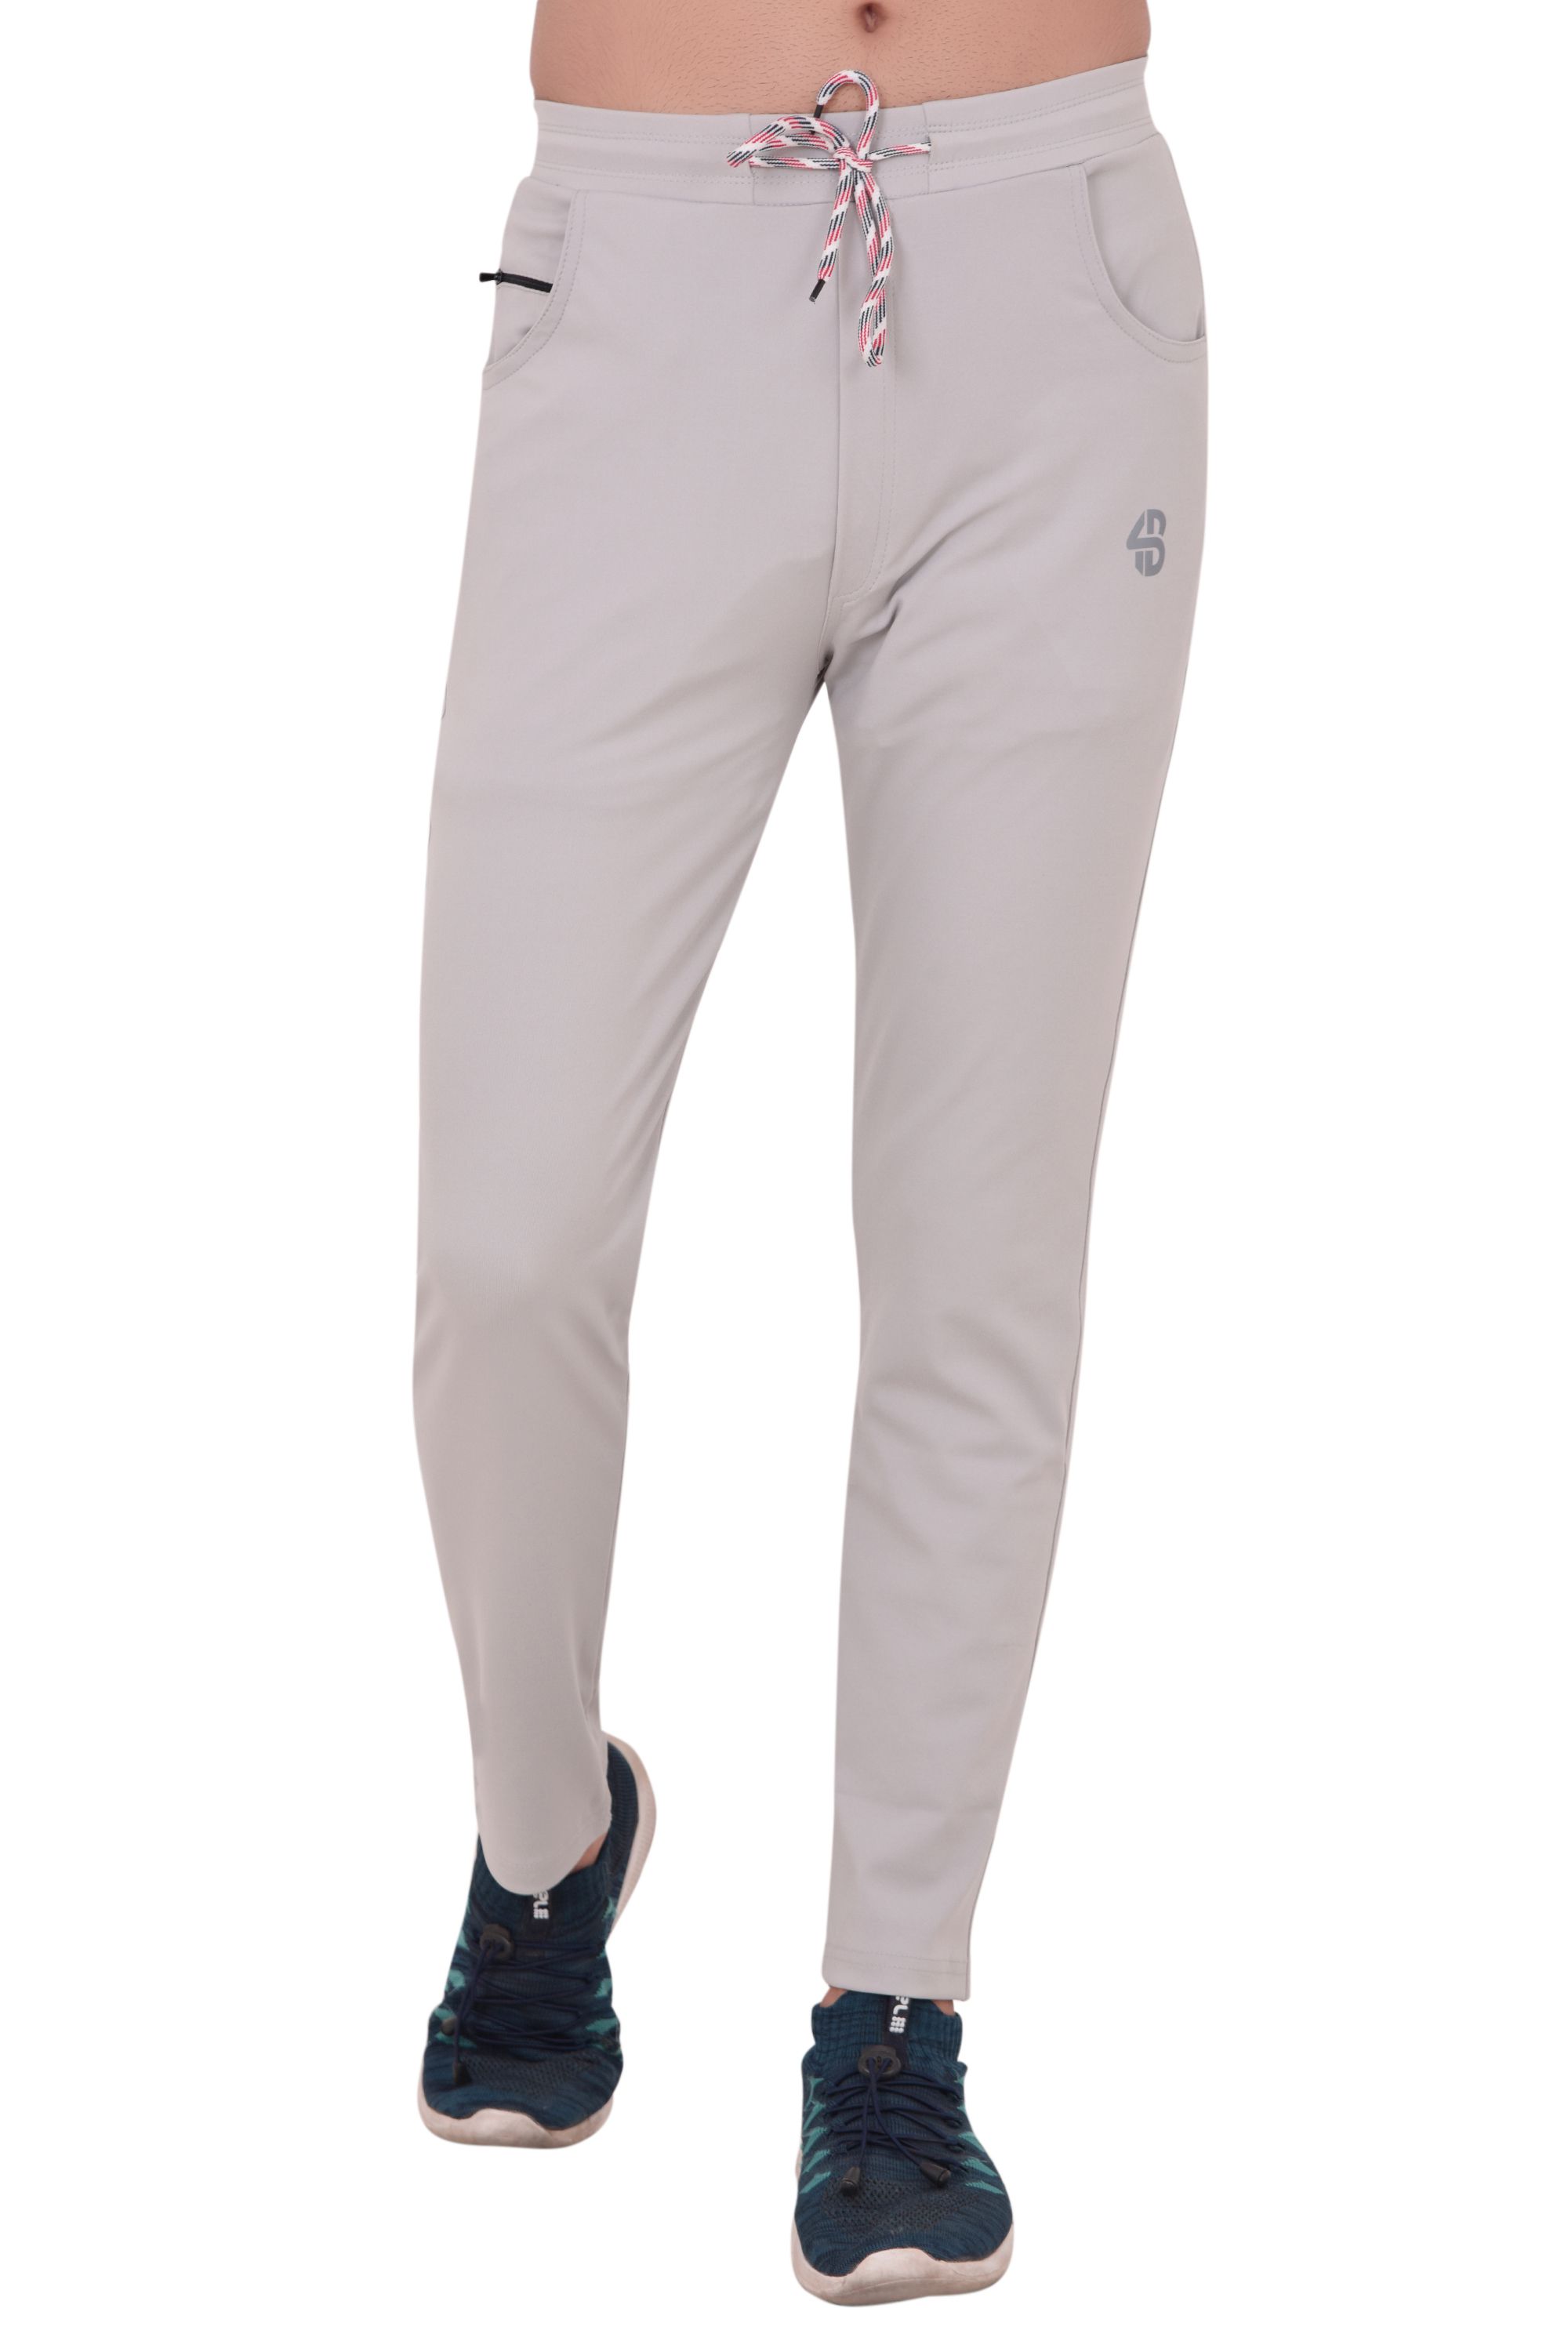 Forbro - Off White Polyester Men's Sports Trackpants ( Pack of 1 )